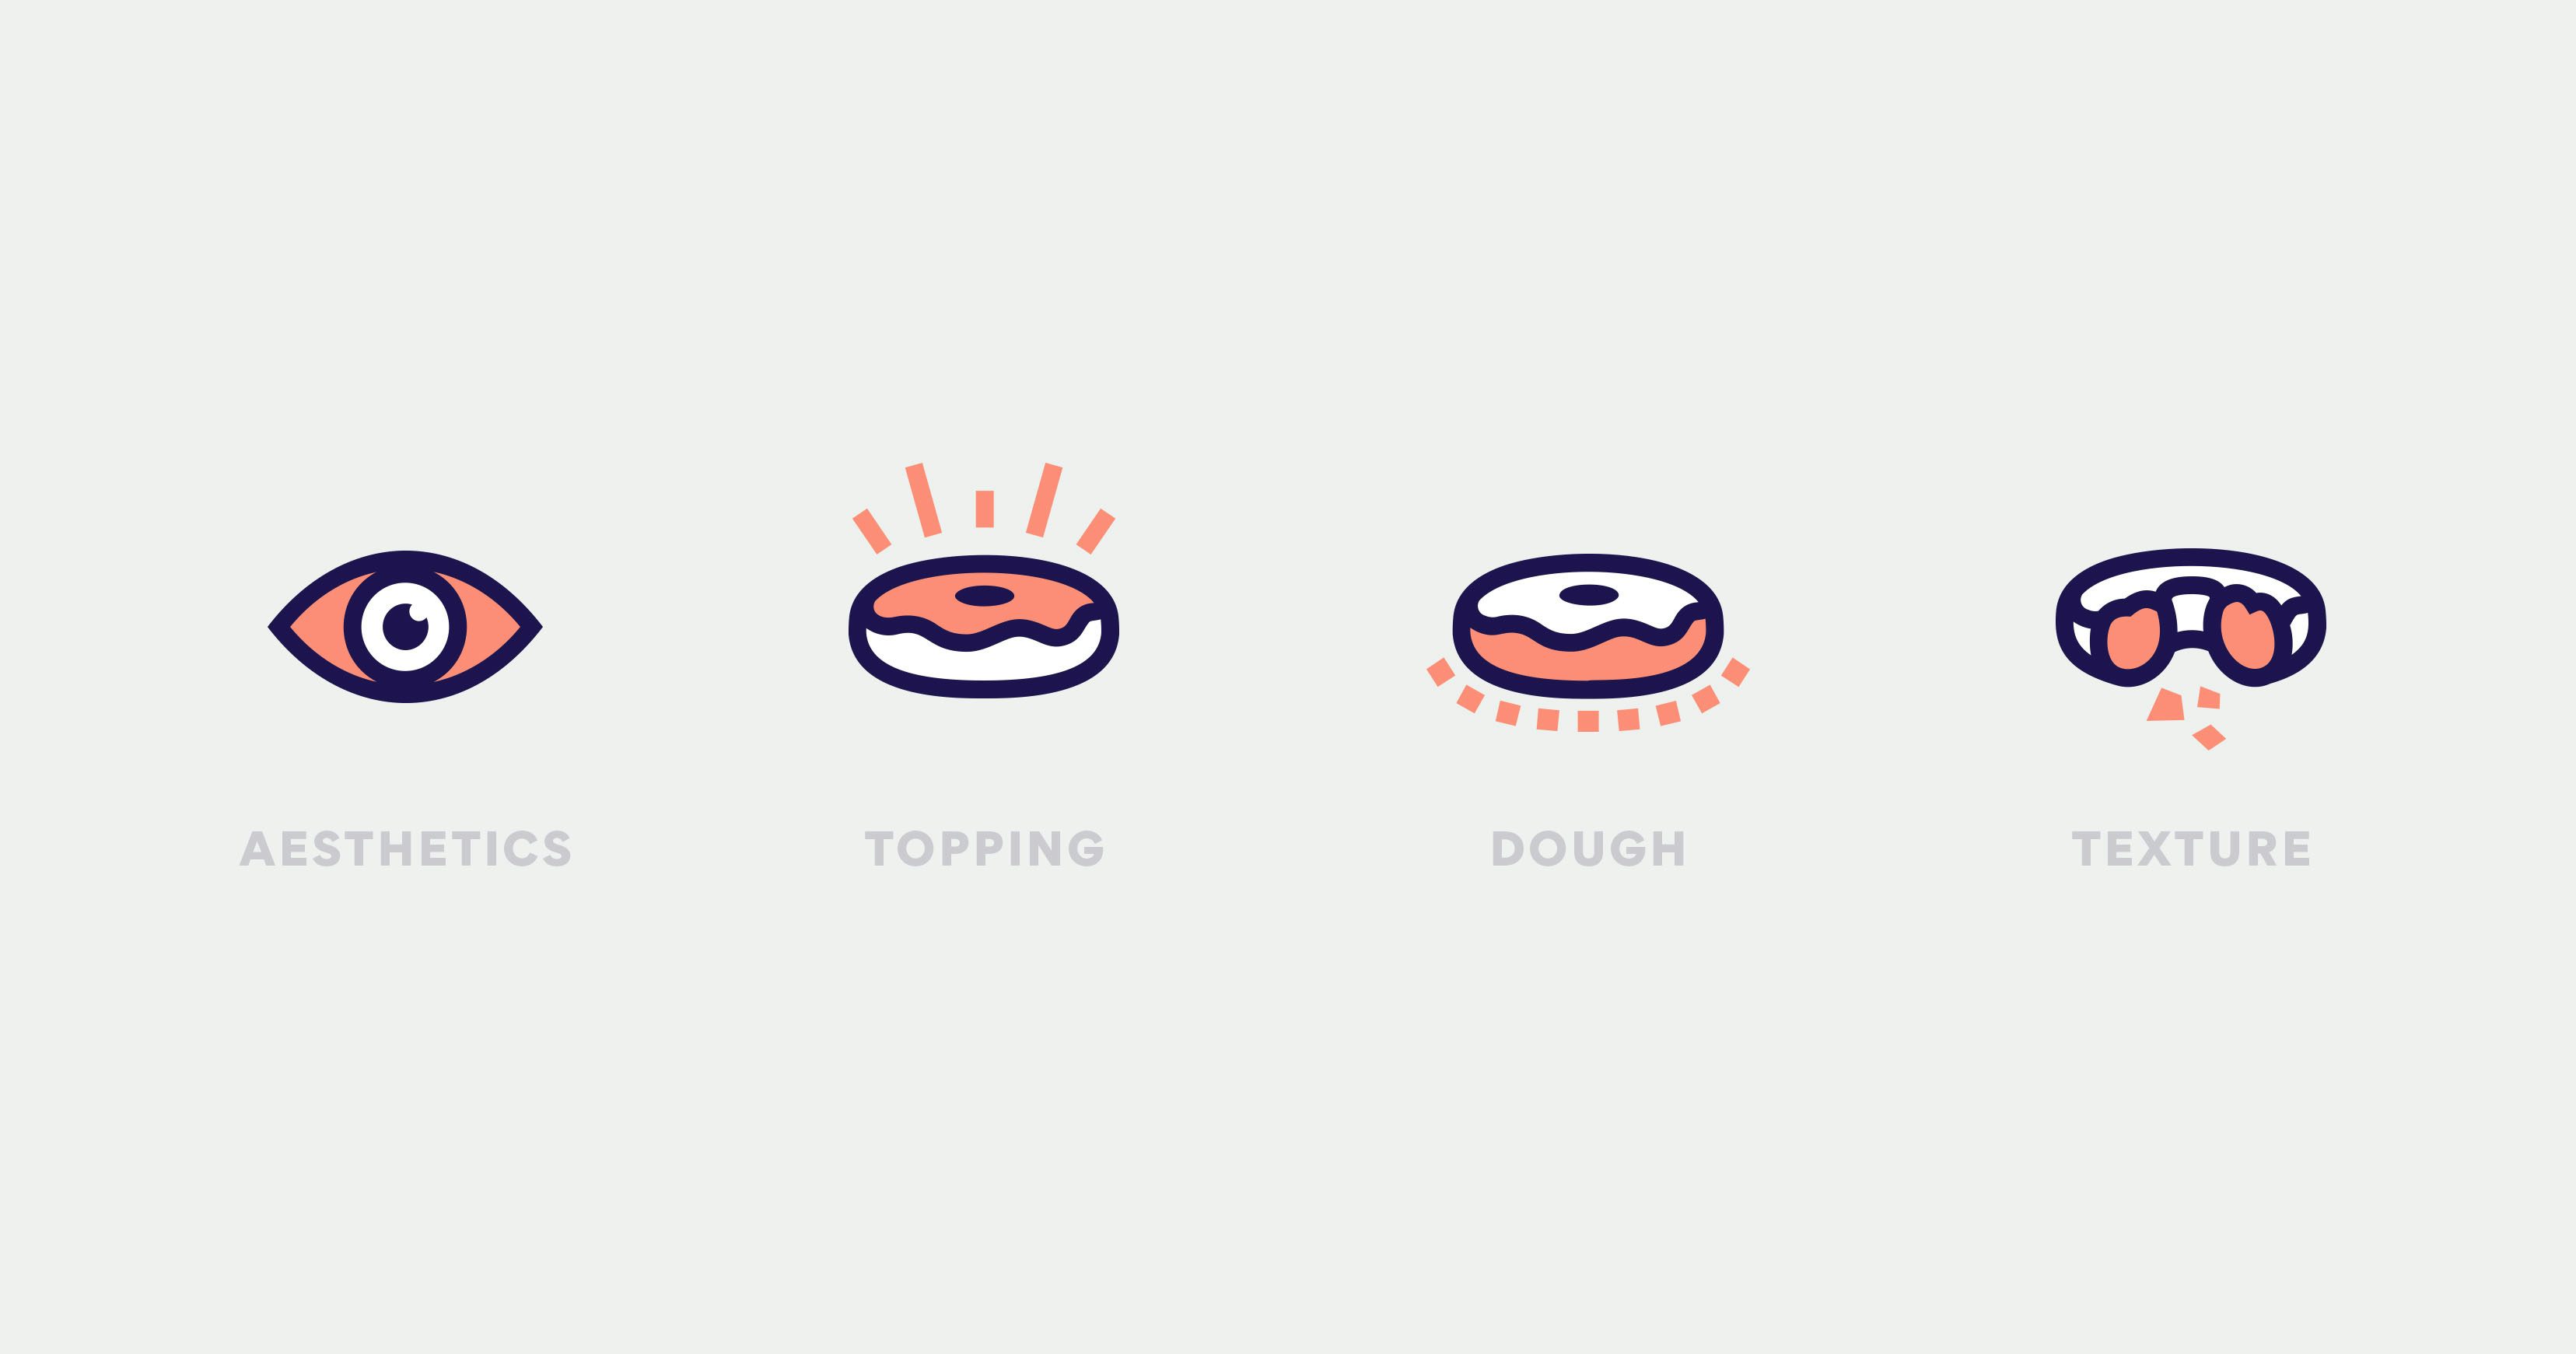 Icons developed for the Holey Grail website.